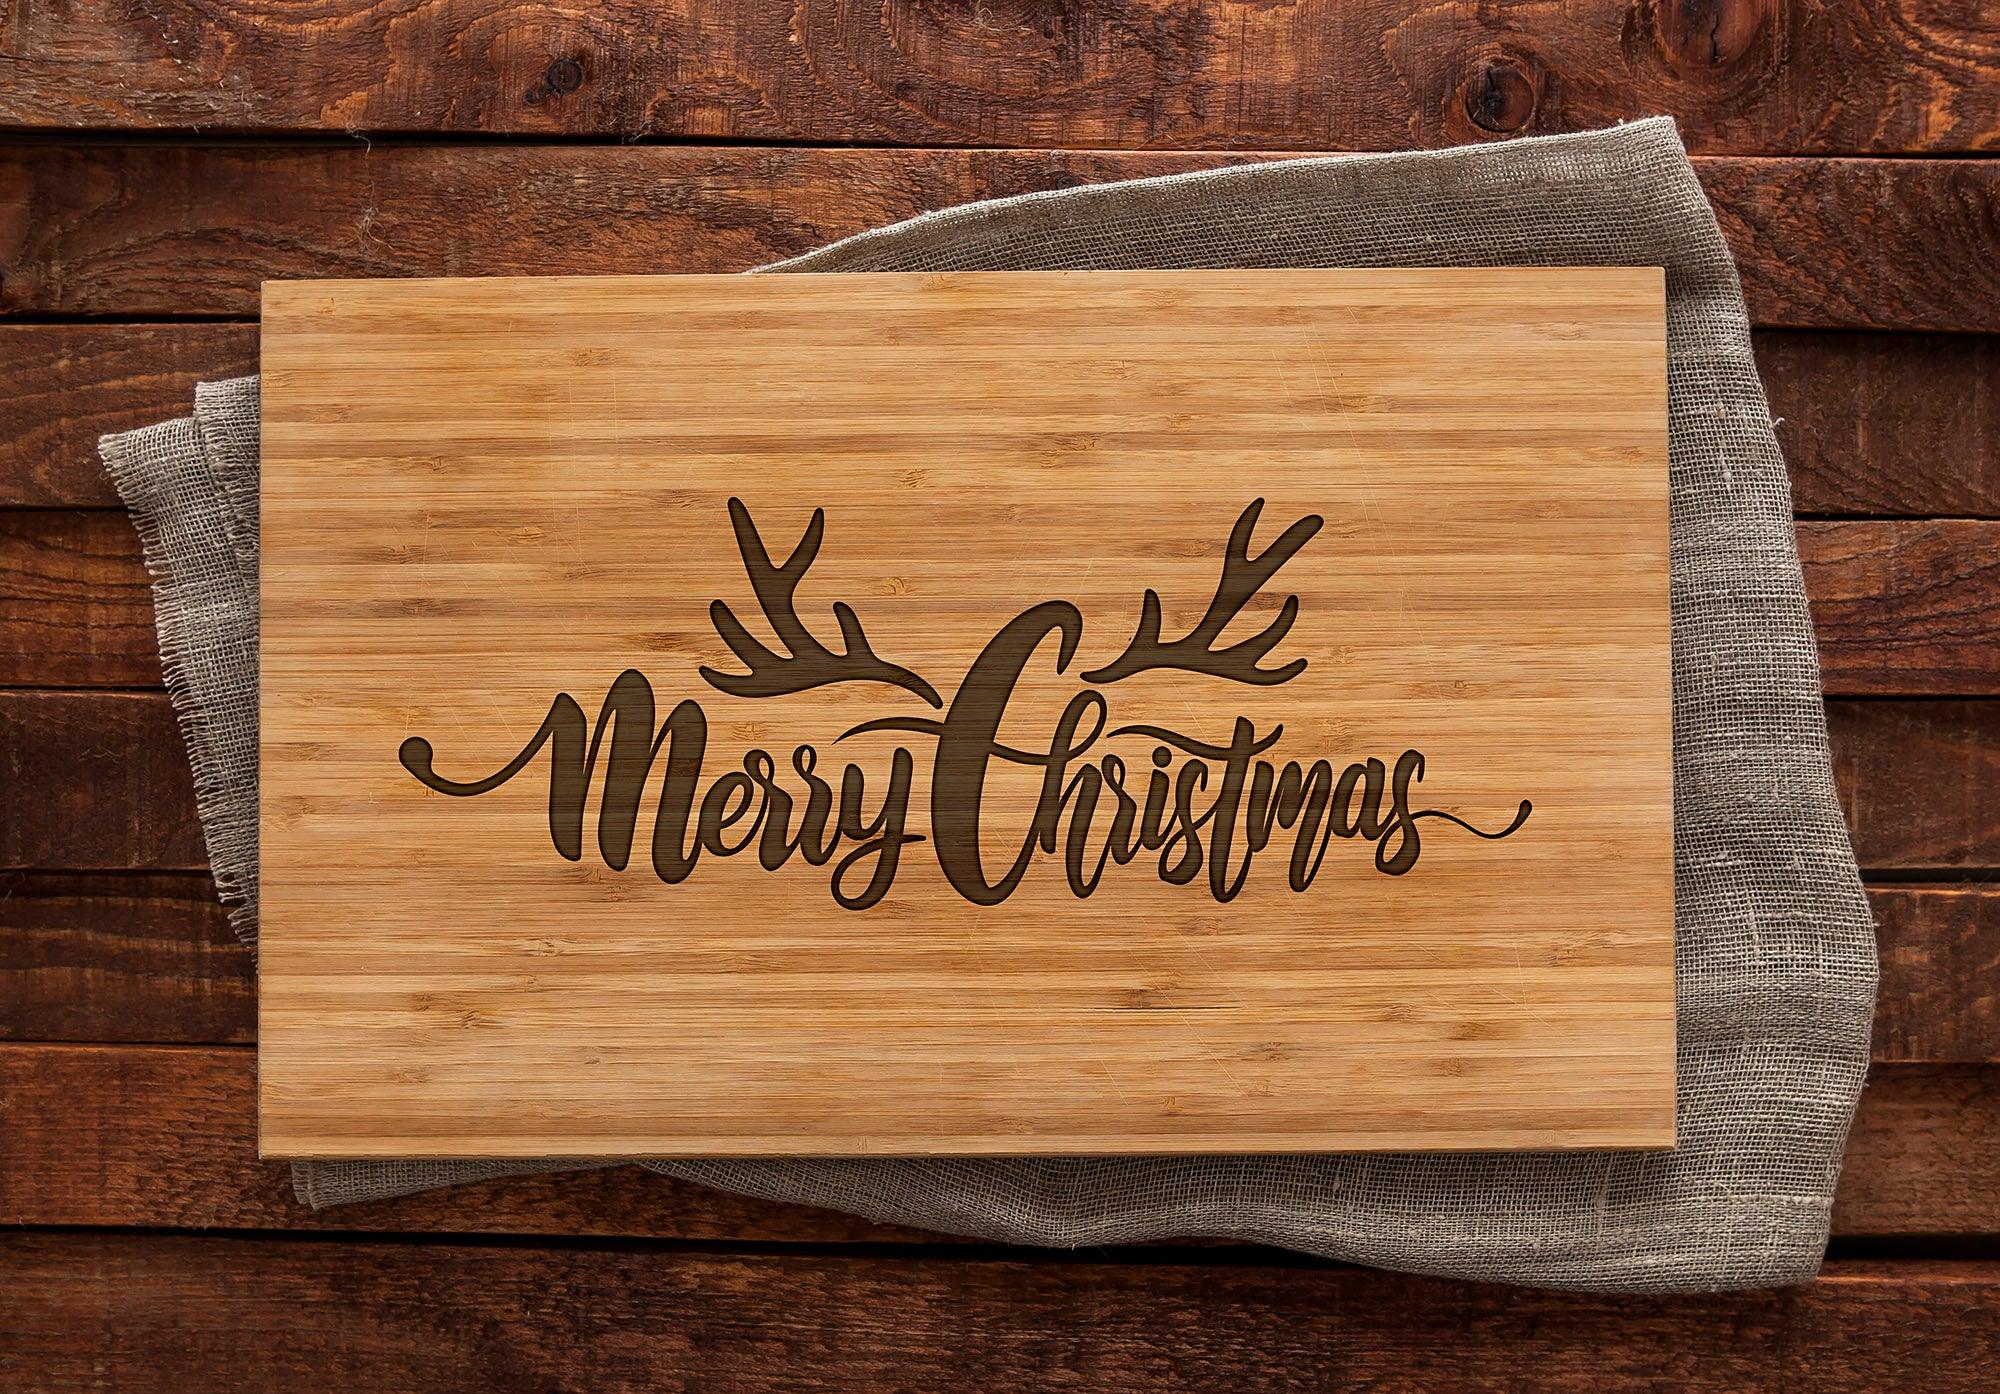 Wife Gift | Engarved Personalised Cutting Board Gift | Christmas Birthday  Chopping Board Gift